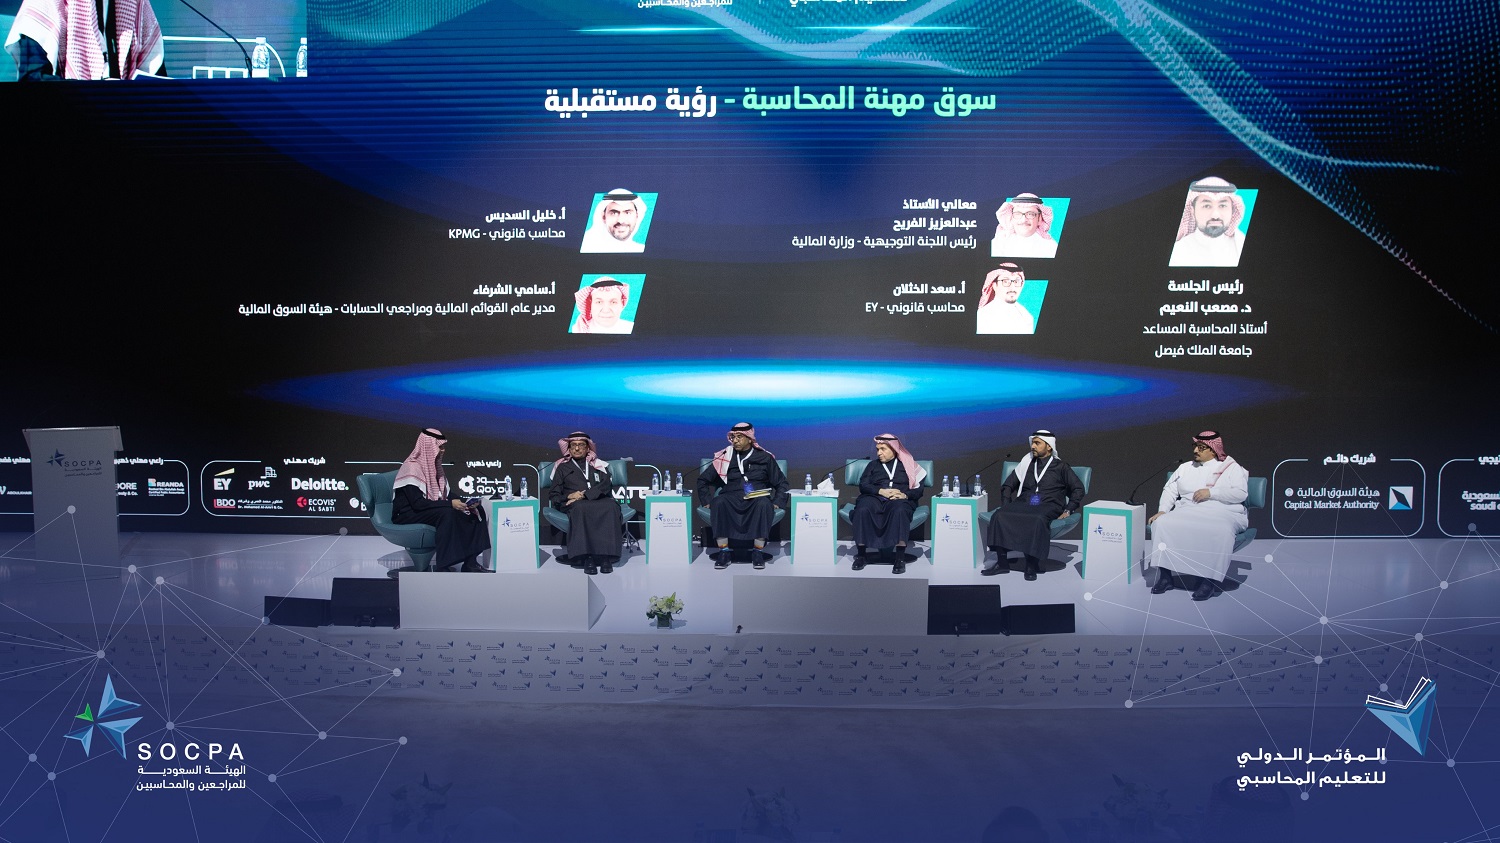 The Activities of the International Conference on Accountancy Education Start with Four Panel Sessions 